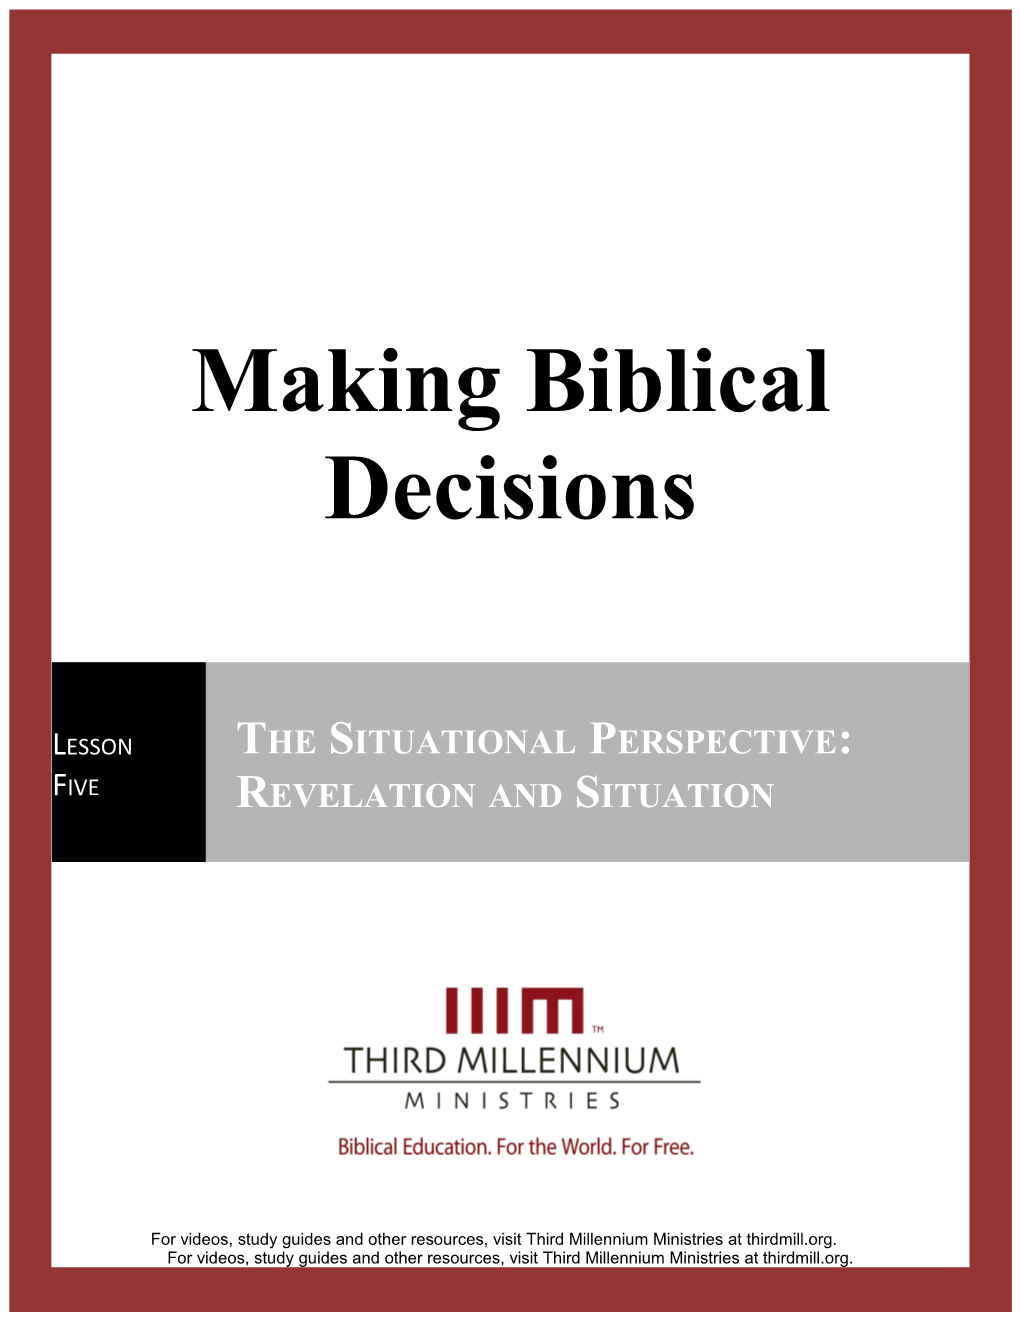 Making Biblical Decisions, Lesson 5